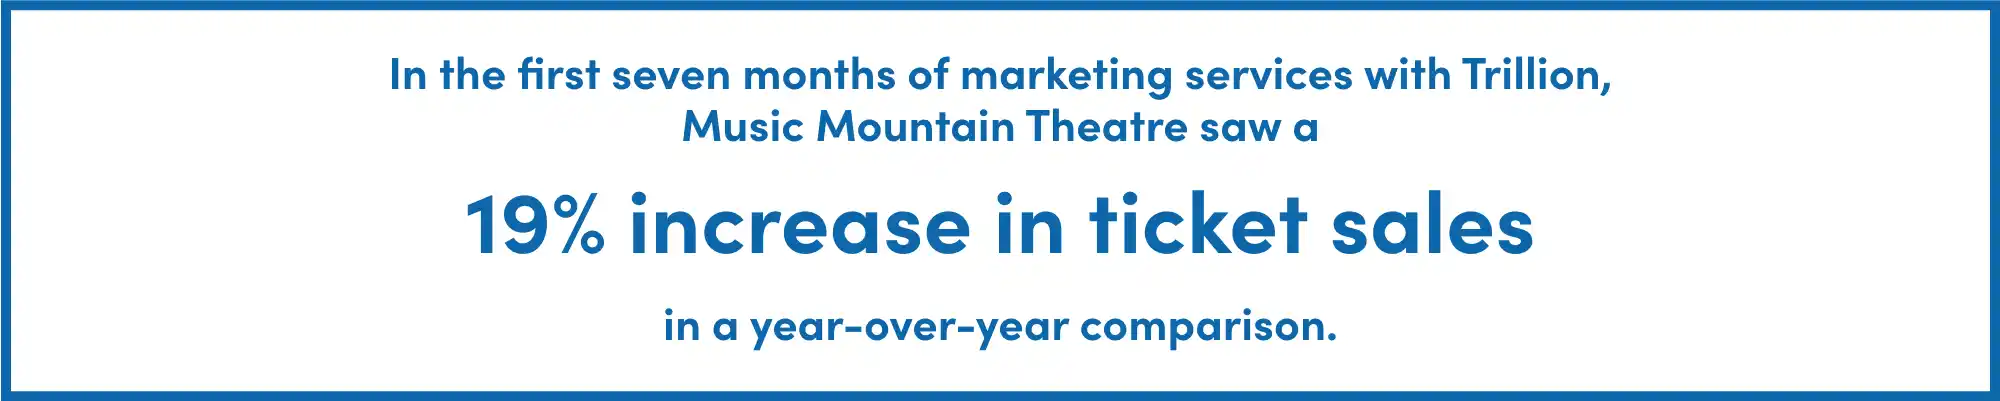 In the first seven months of marketing services with Trillion, Music Mountain Theatre saw a 19% increase in ticket sales in a year-over-year comparison.